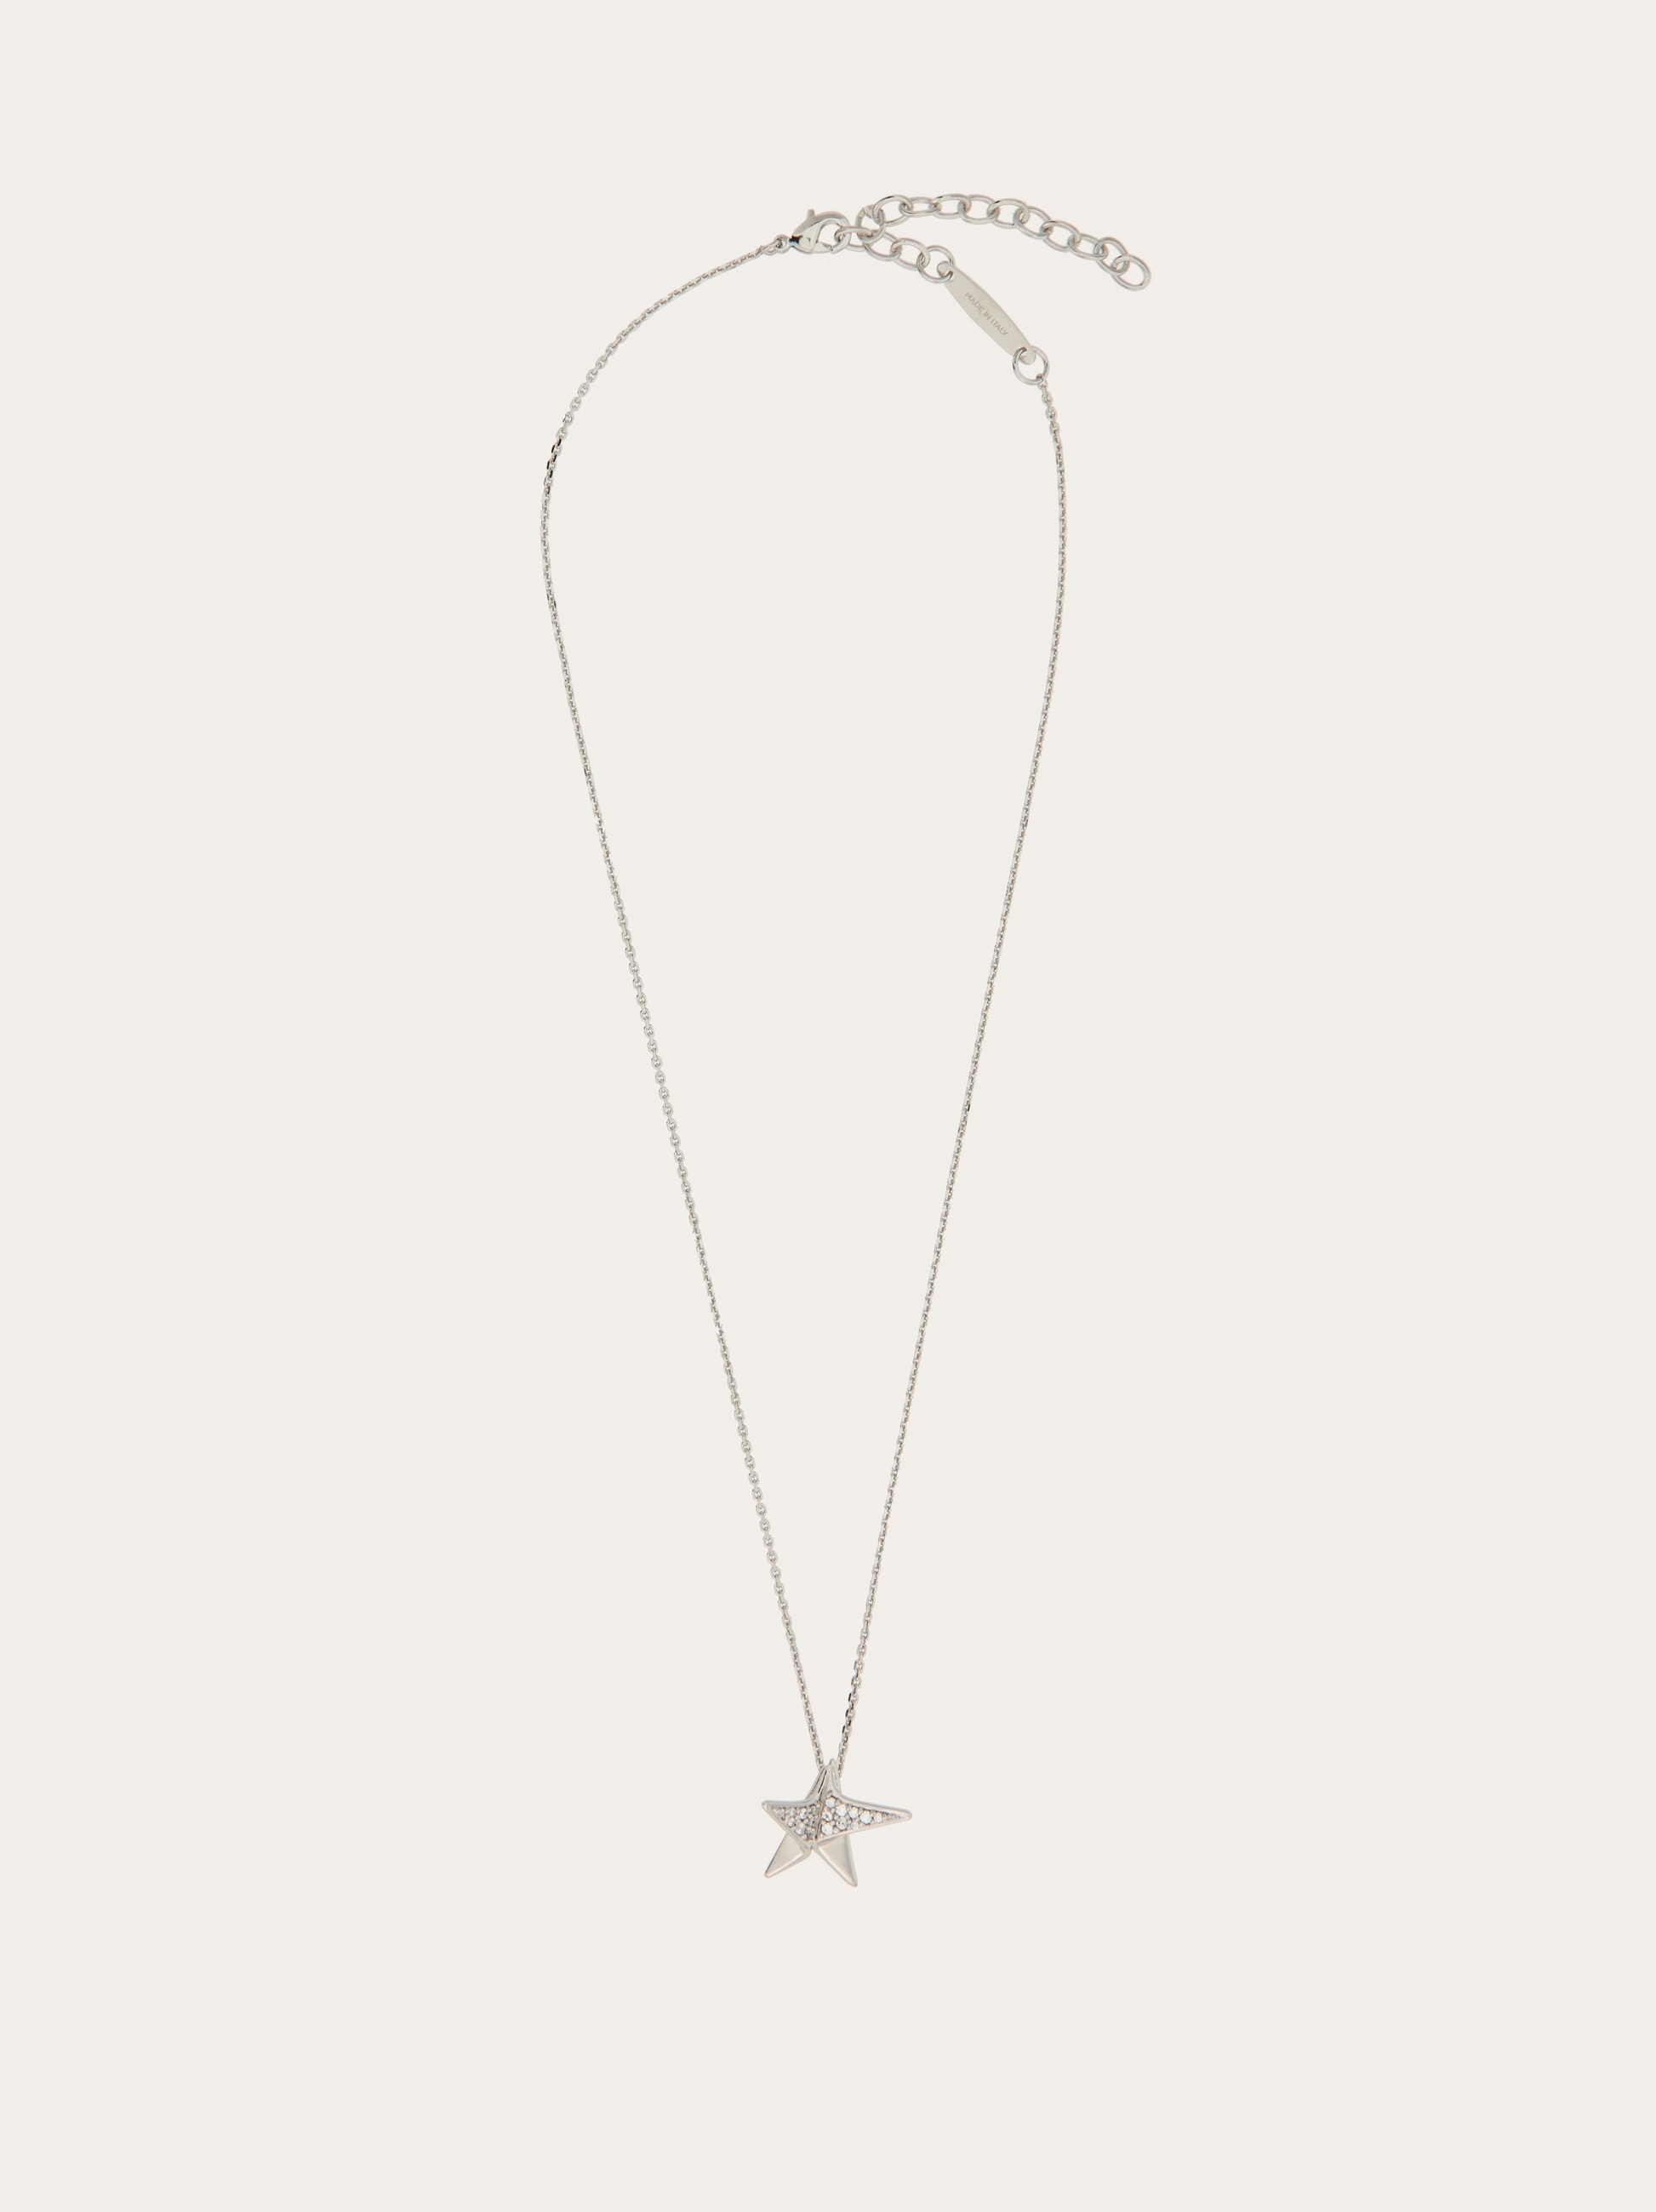 Necklace with star pendant - 1